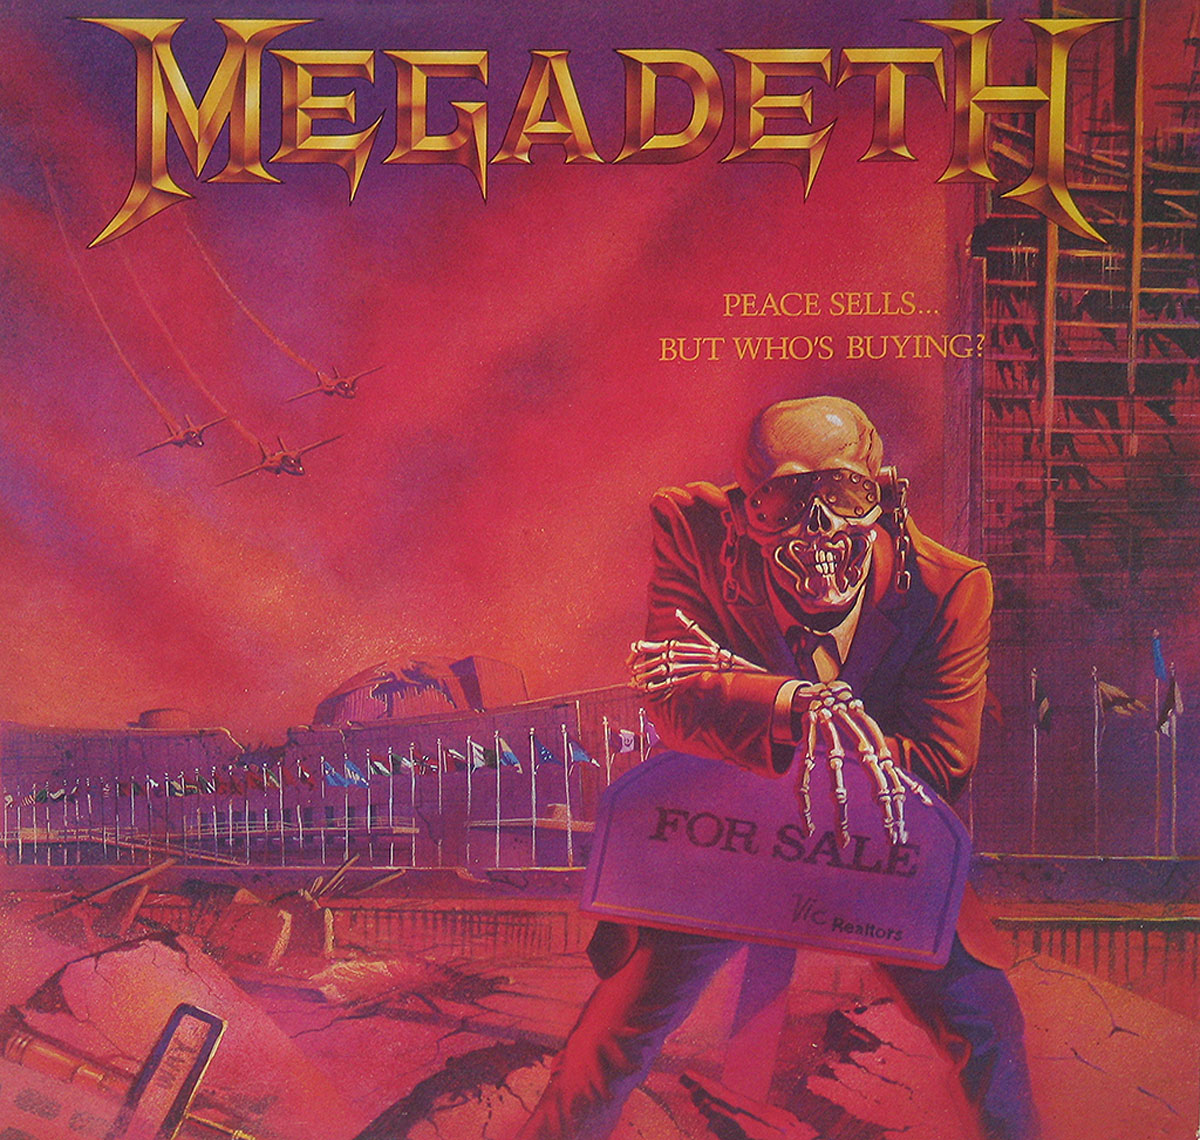 High Resolution Photo MEGADETH PEACE SELLS BUT WHO IS BUYING USA Release Vinyl Record